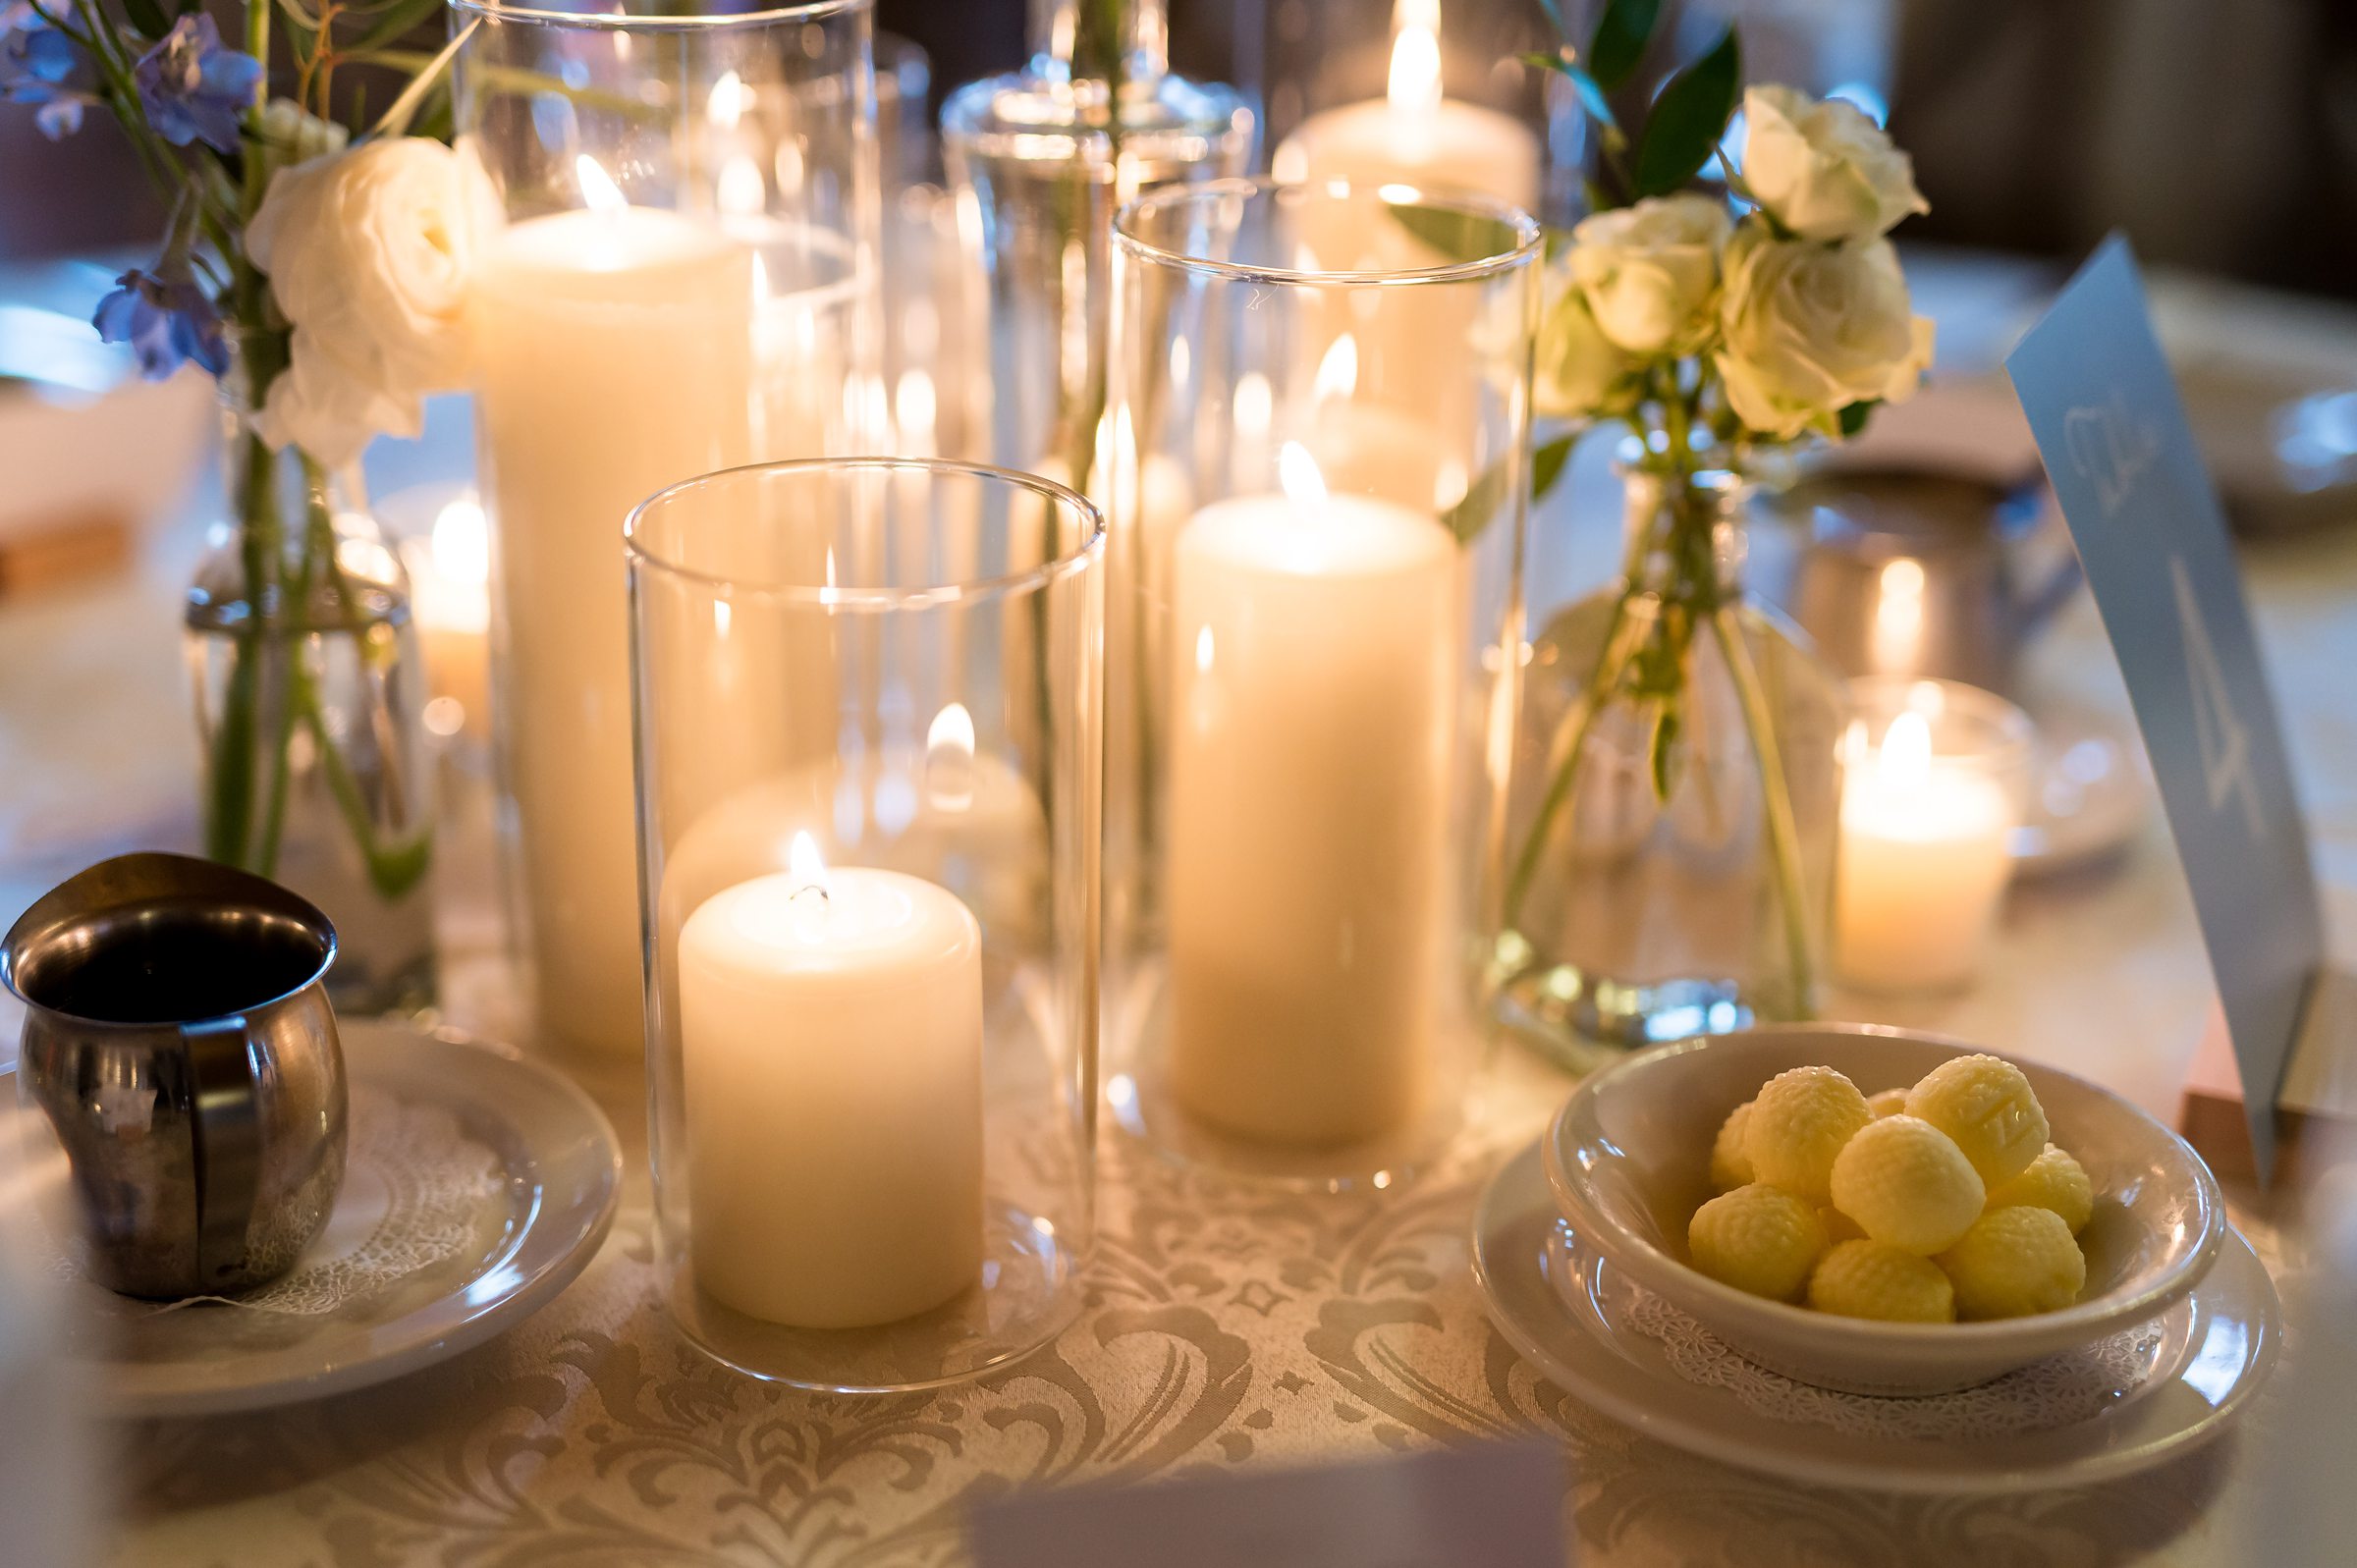 A table centerpiece with lit candles in glass holders, small white flowers in vases, a metal pitcher on a saucer, and a bowl of round yellow candies.